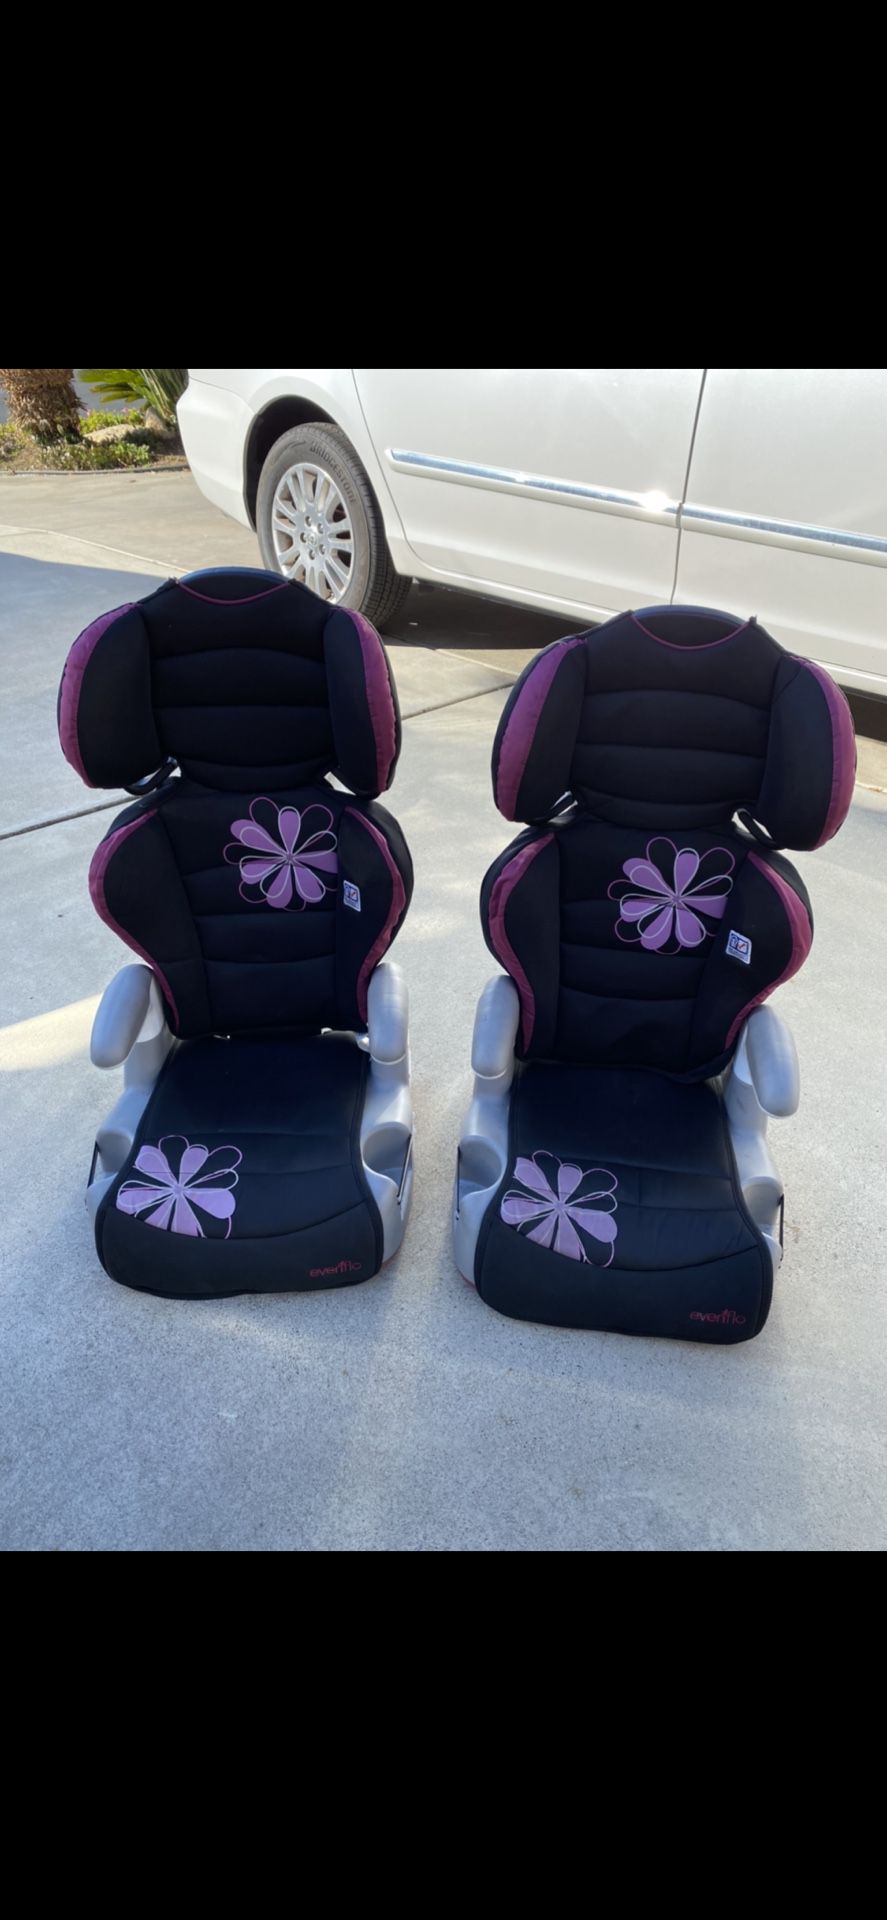 Highback Booster Seats with Cupholders